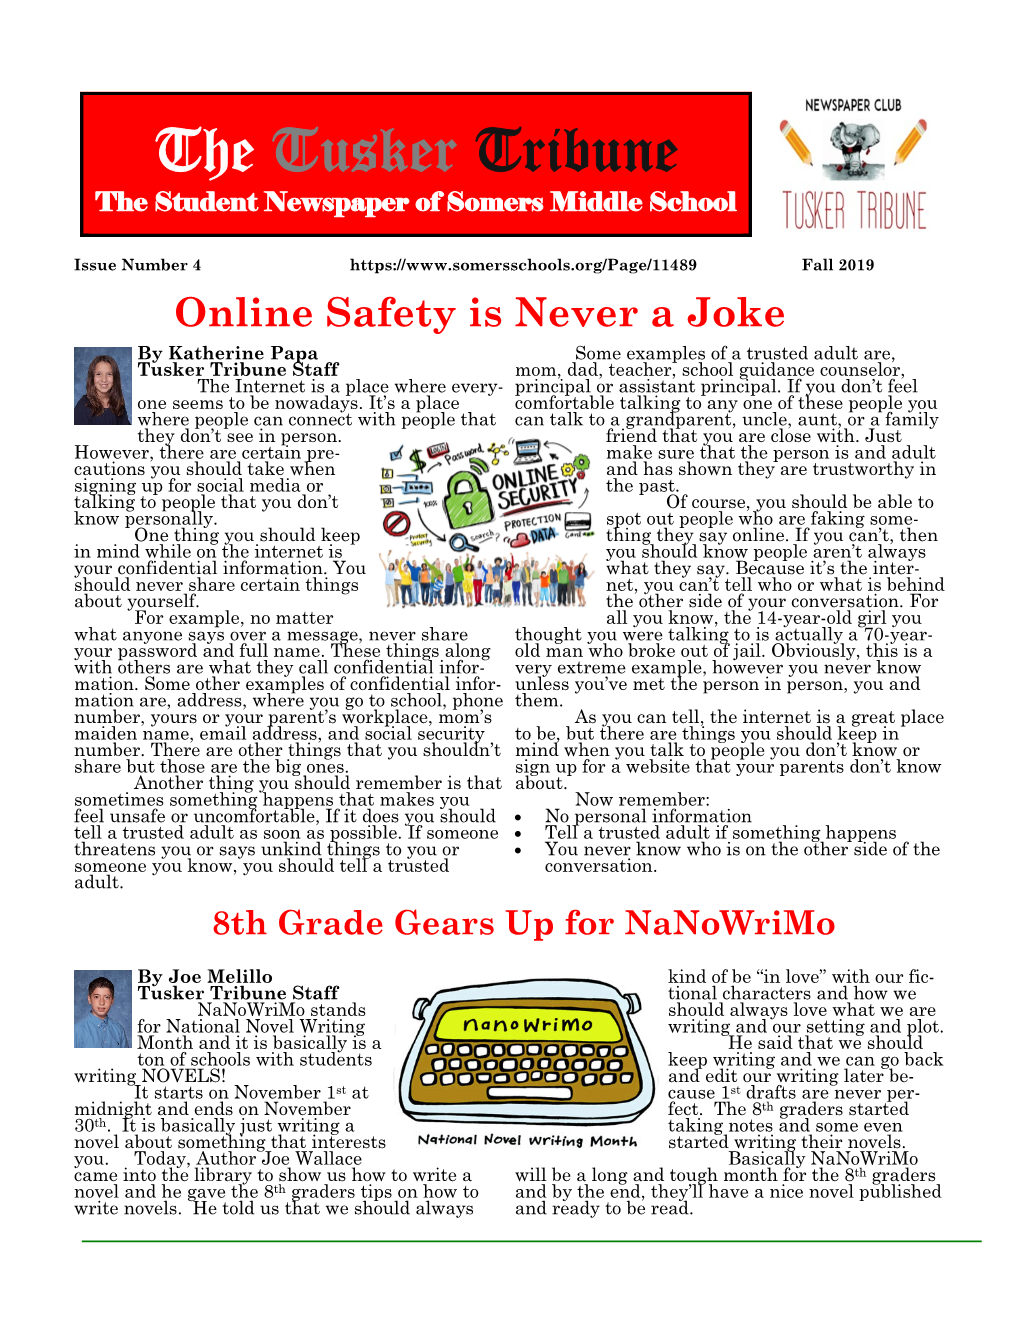 The Tusker Tribune the Student Newspaper of Somers Middle School